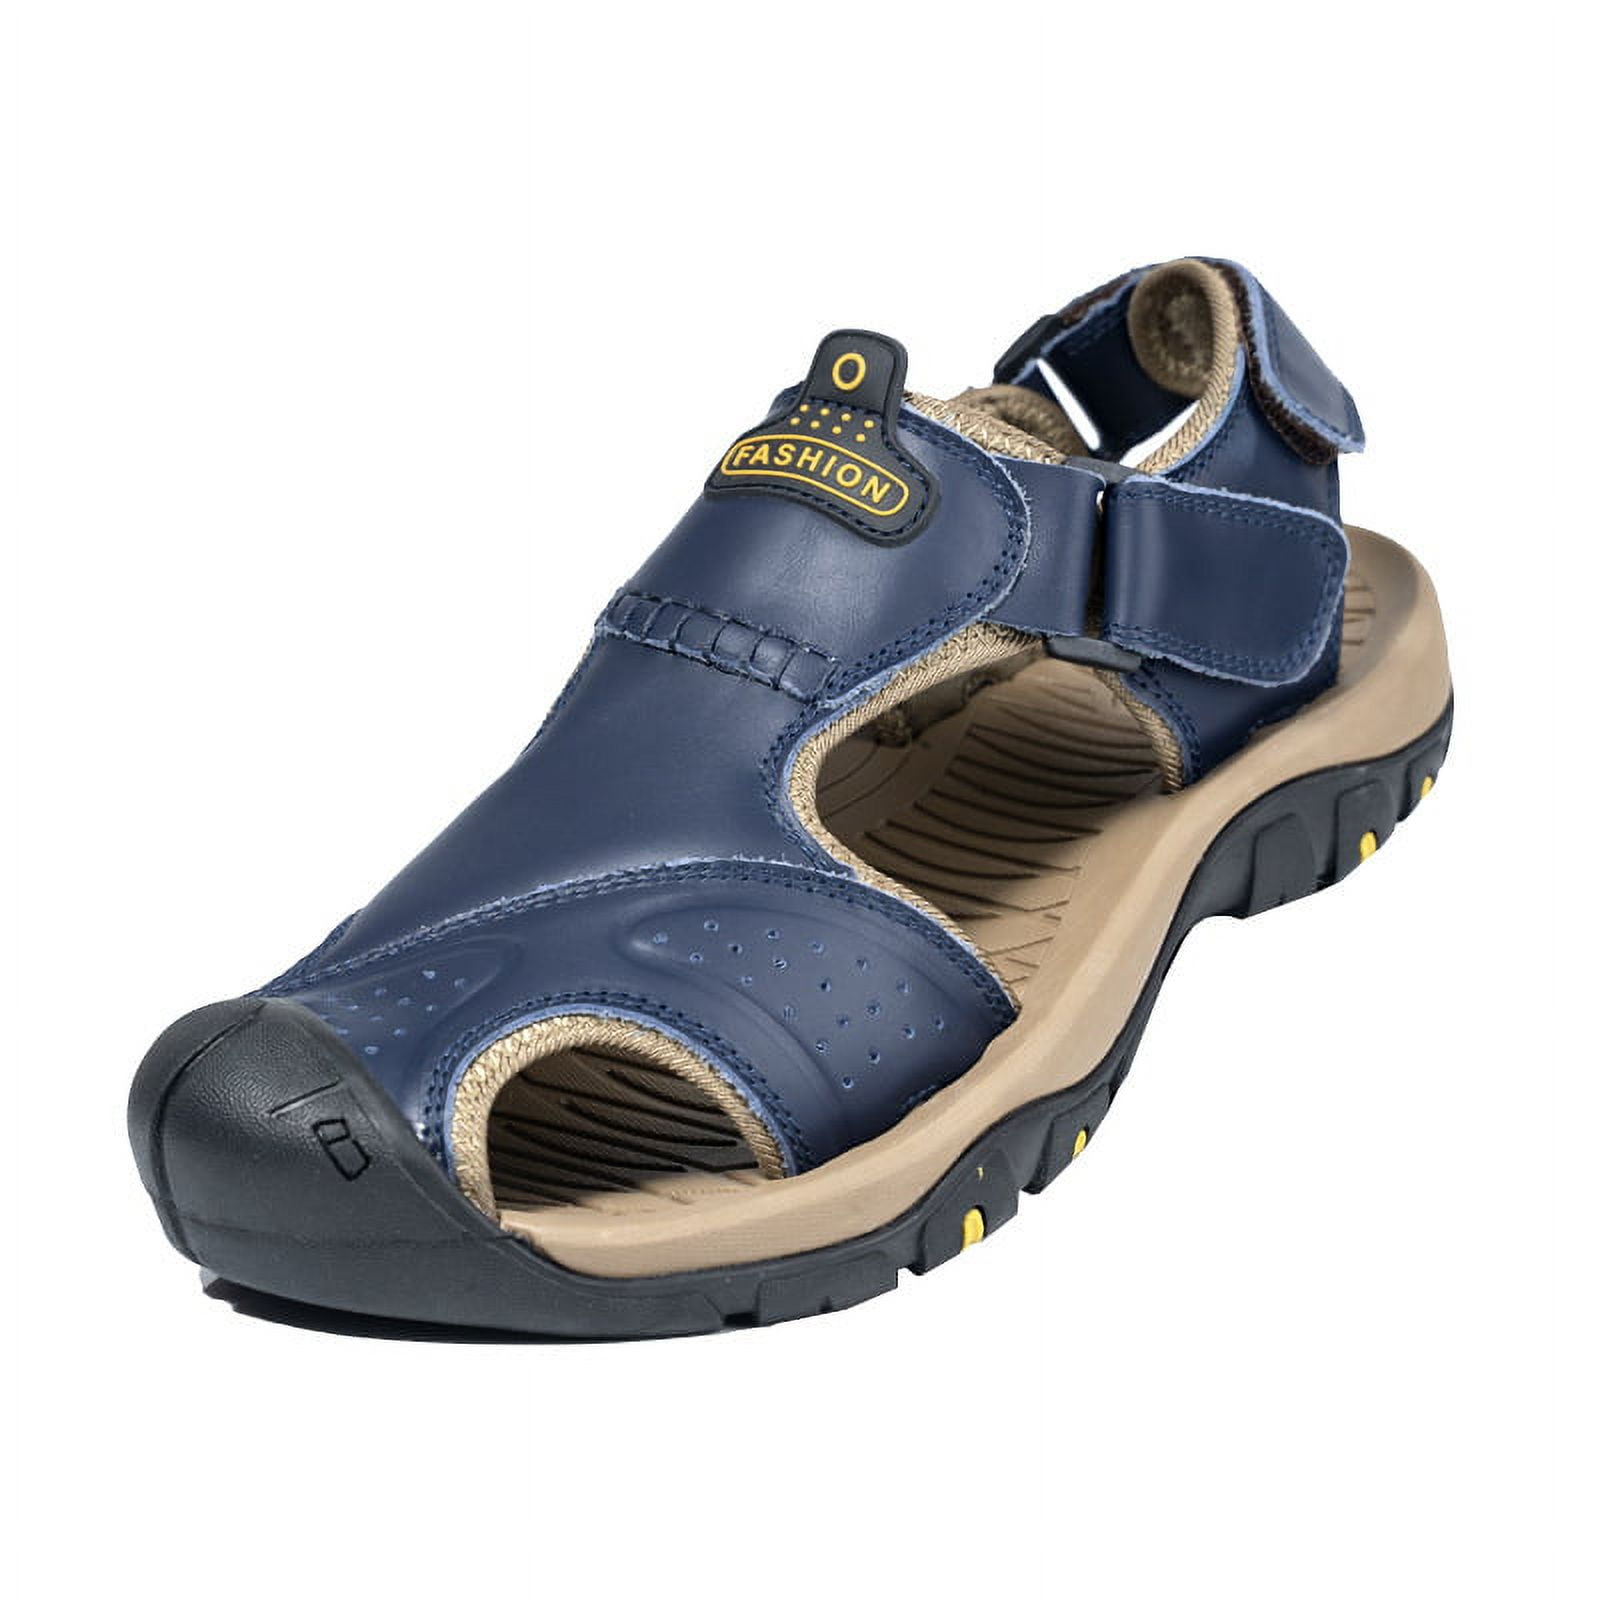 Men's Leather Beach Sandals Hiking Outdoor Water Sports Sandals for ...